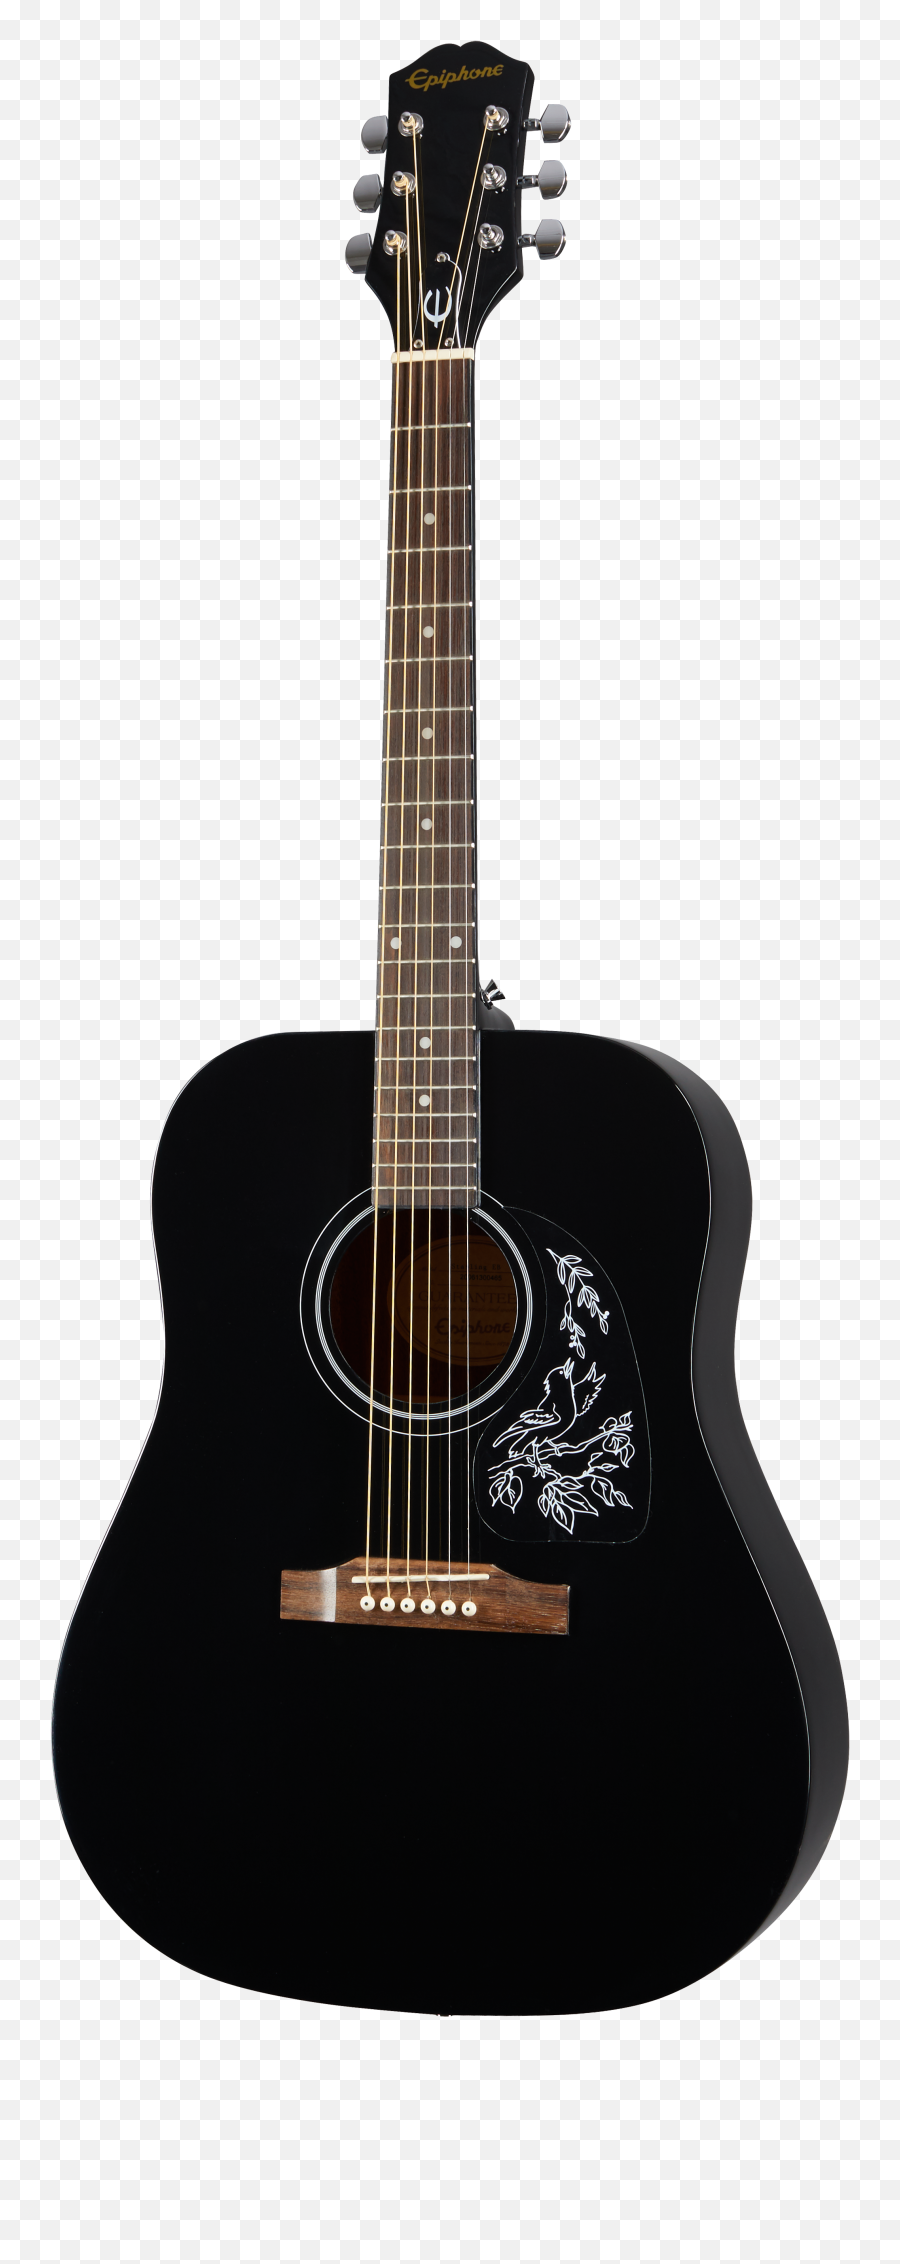 Epiphone Acoustic Guitars - Epiphone Starling Emoji,How To Get Right Emotion On Guitar